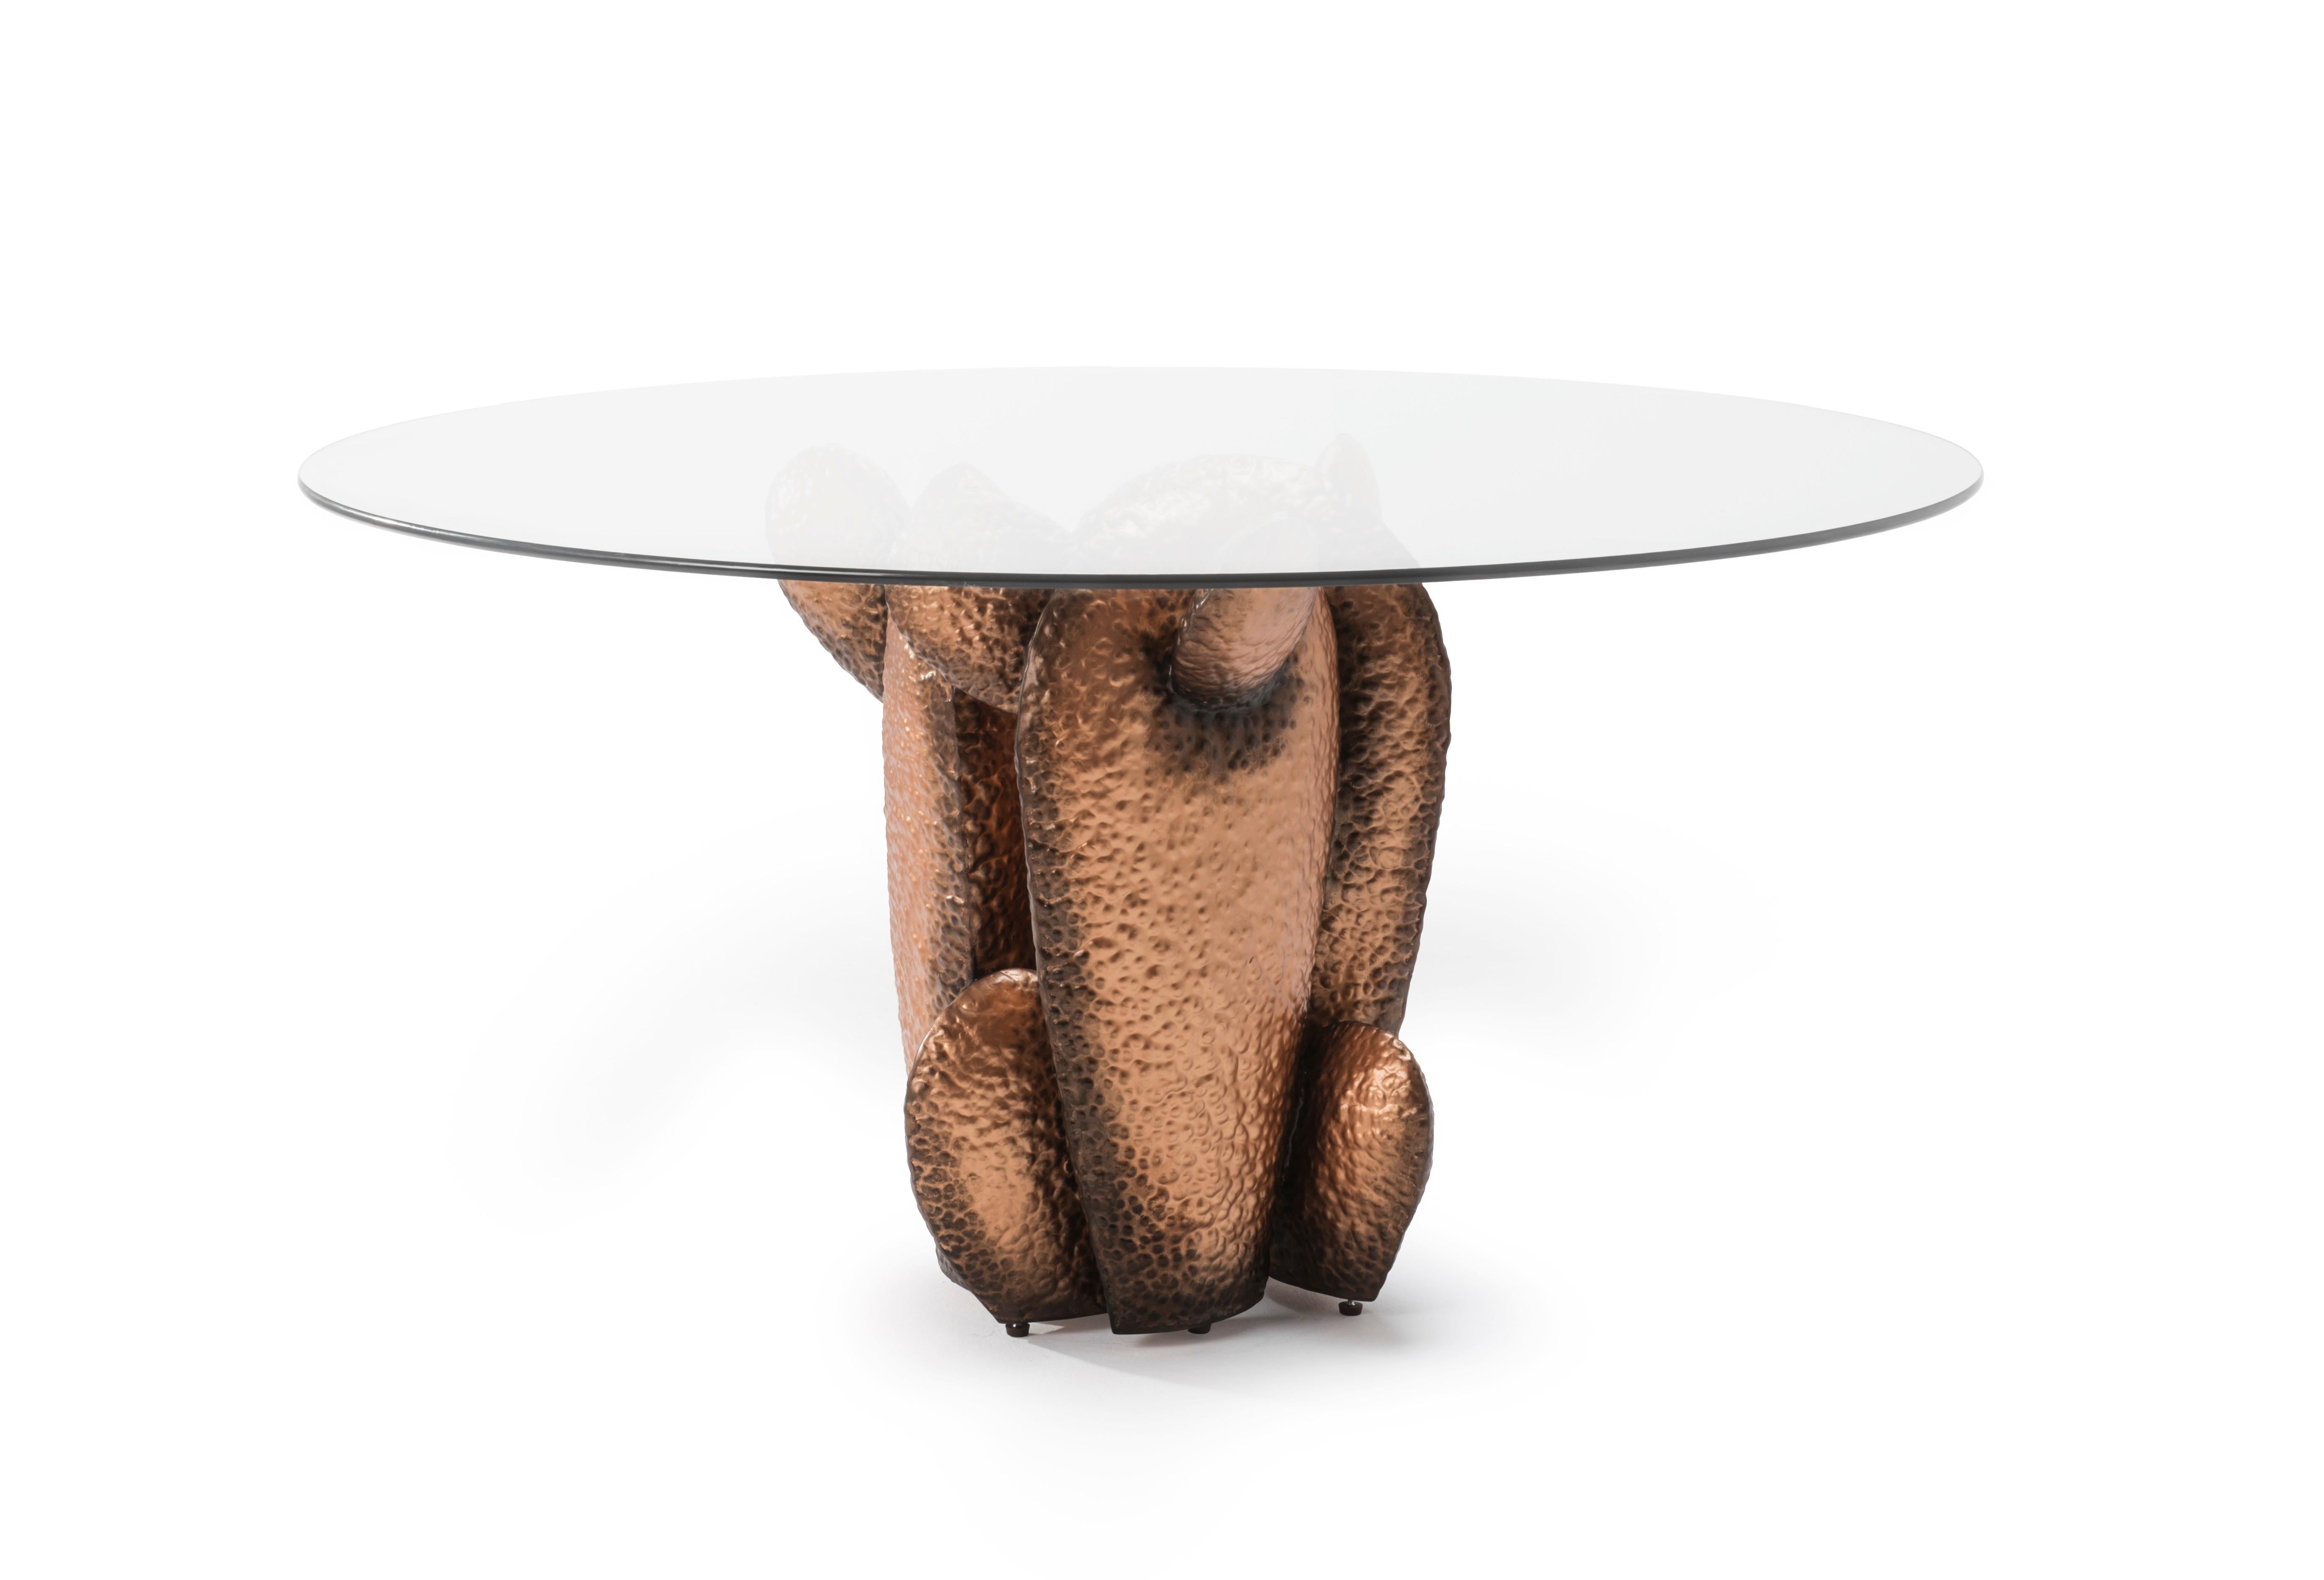 Gobi dining table by Kenneth Cobonpue
Materials: Steel. Glass. 
Dimensions: 
Glass diameter 150 cm x height 19mm 
Base 60 cm x 58.5 cm x height 75 cm

Inspired by the characteristic form of the cactus, Gobi is a striking set of tables with its